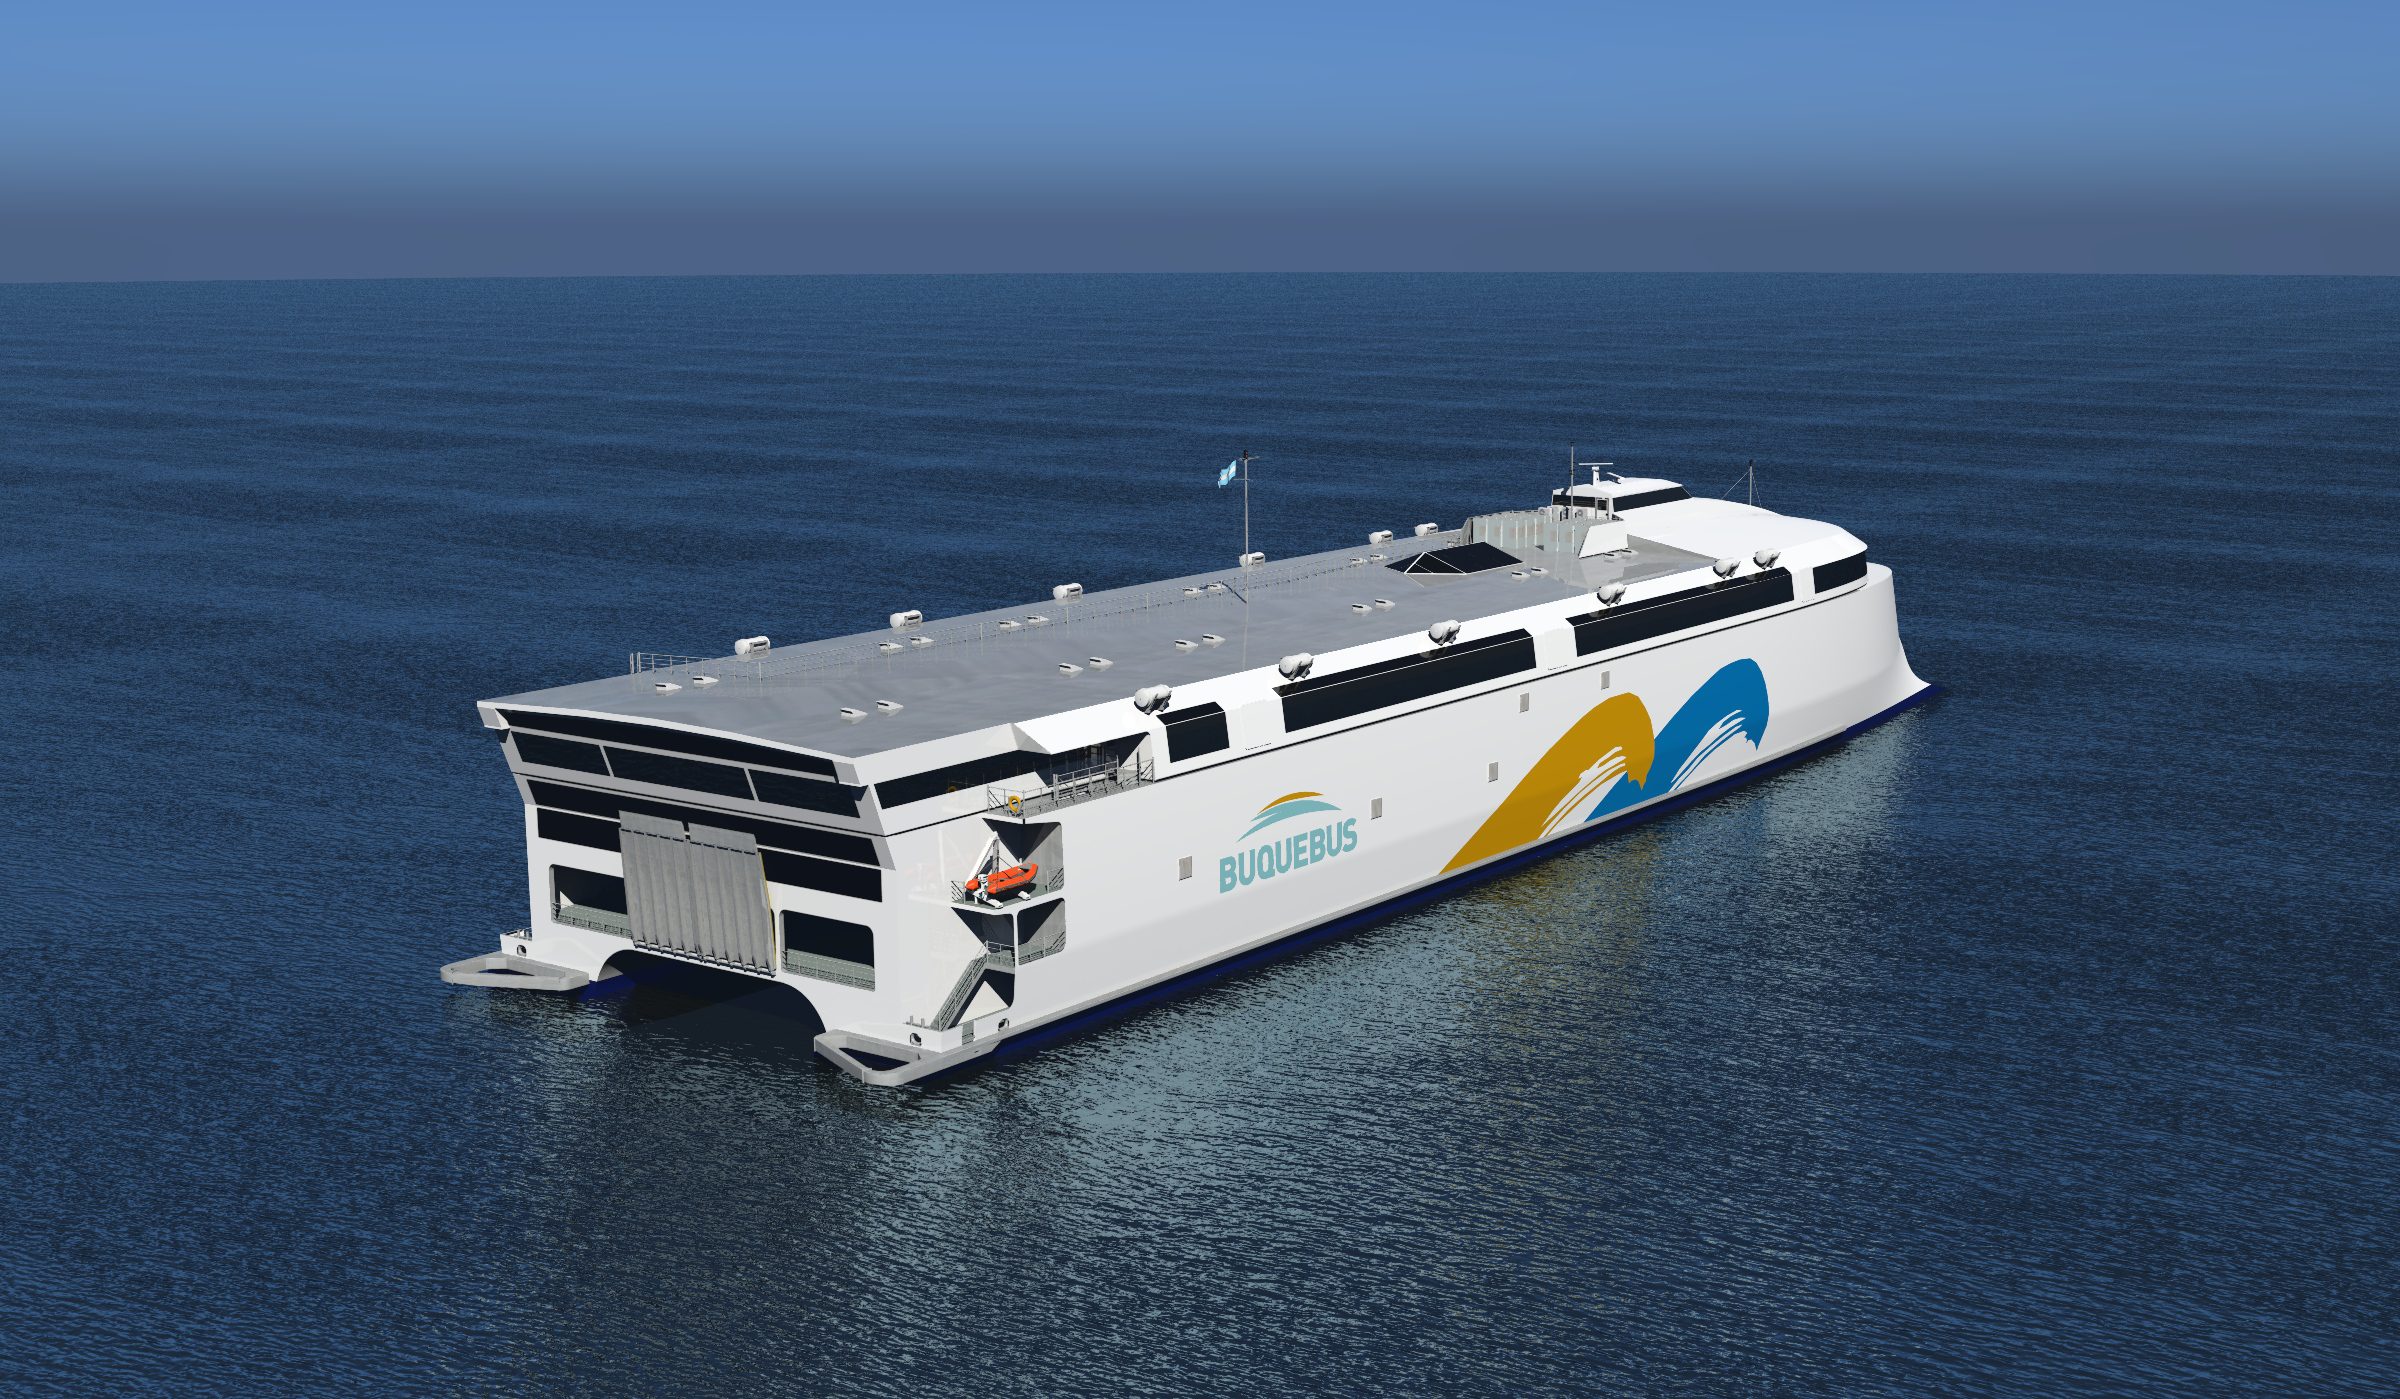 An illustration of the world's largrest electric battery-powered ferry being built by Incat